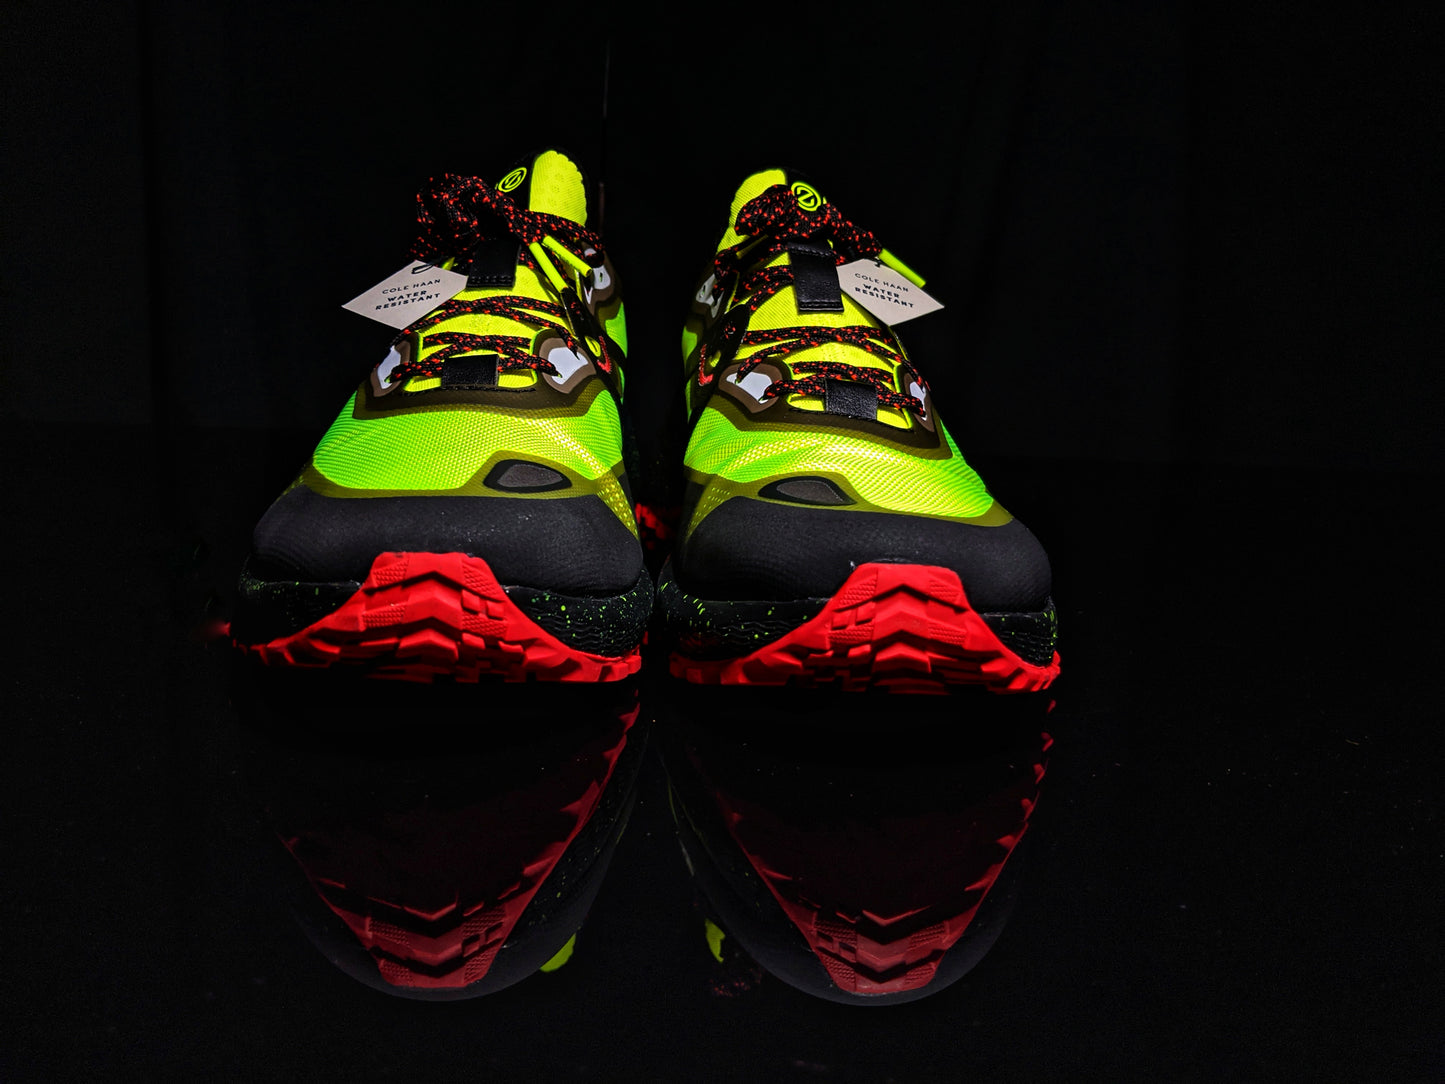 Cole Haan Zerogrand Yellow / Black running shoes Size 13 M